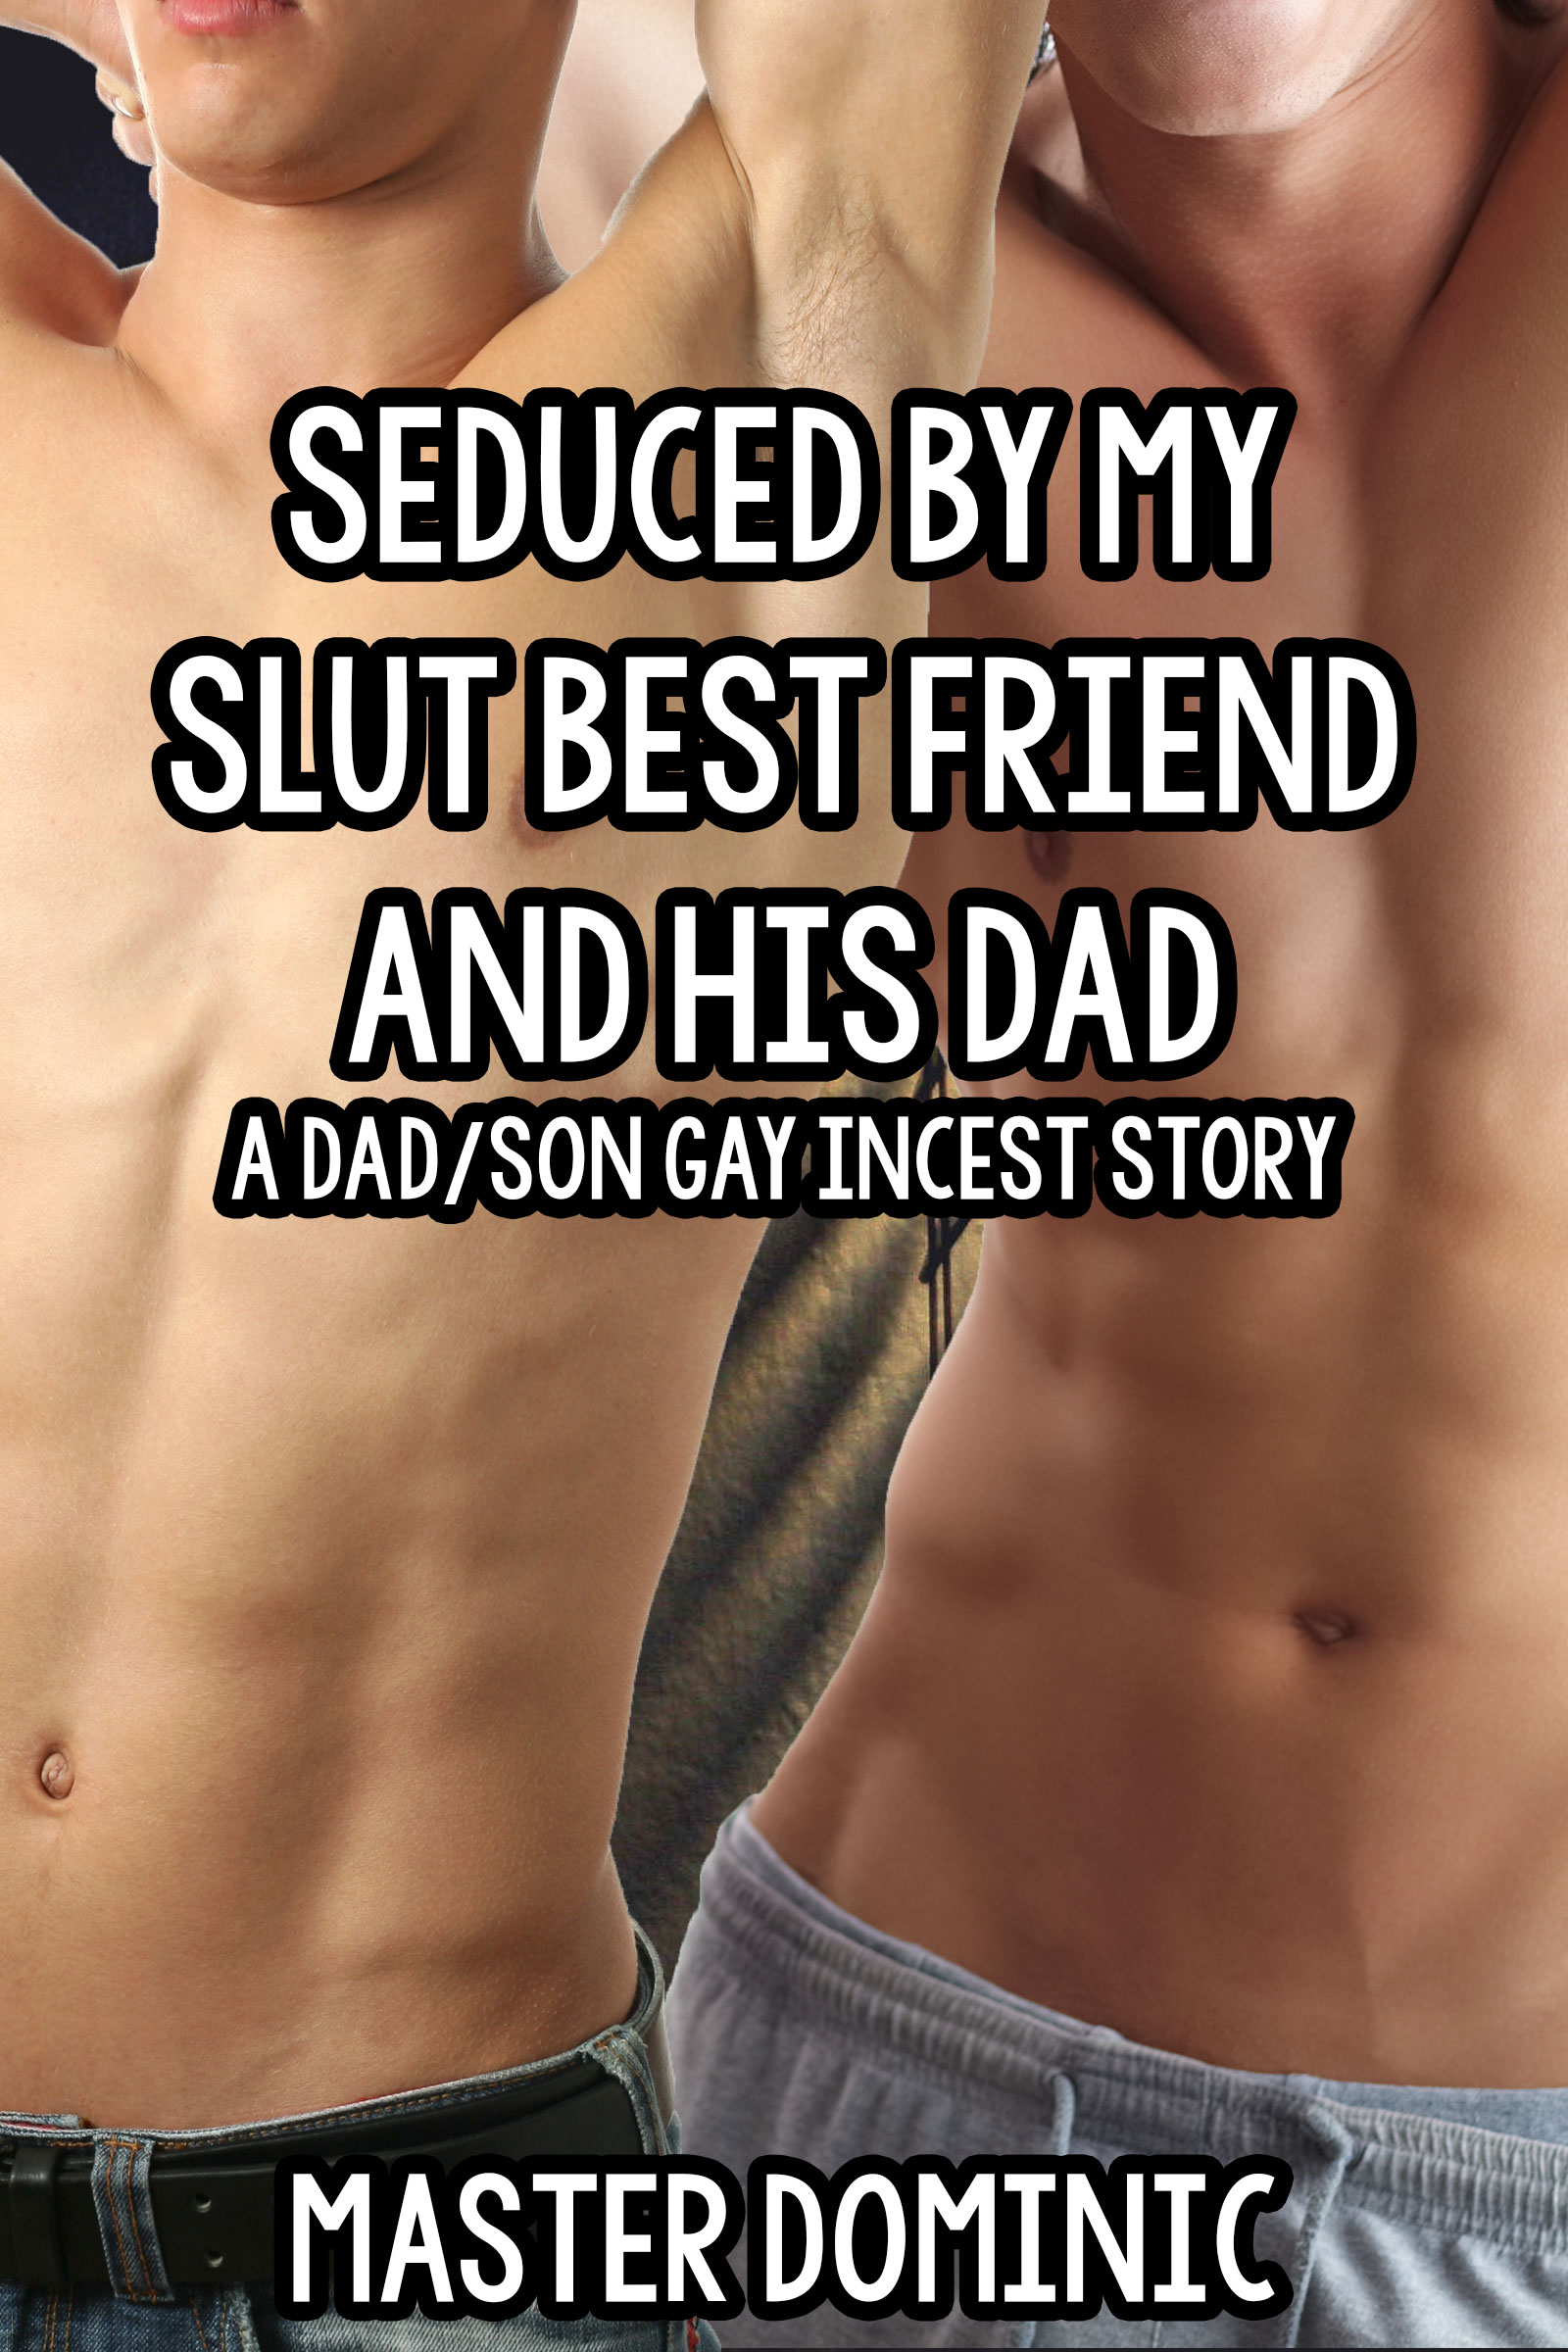 Dads friend erotic stories